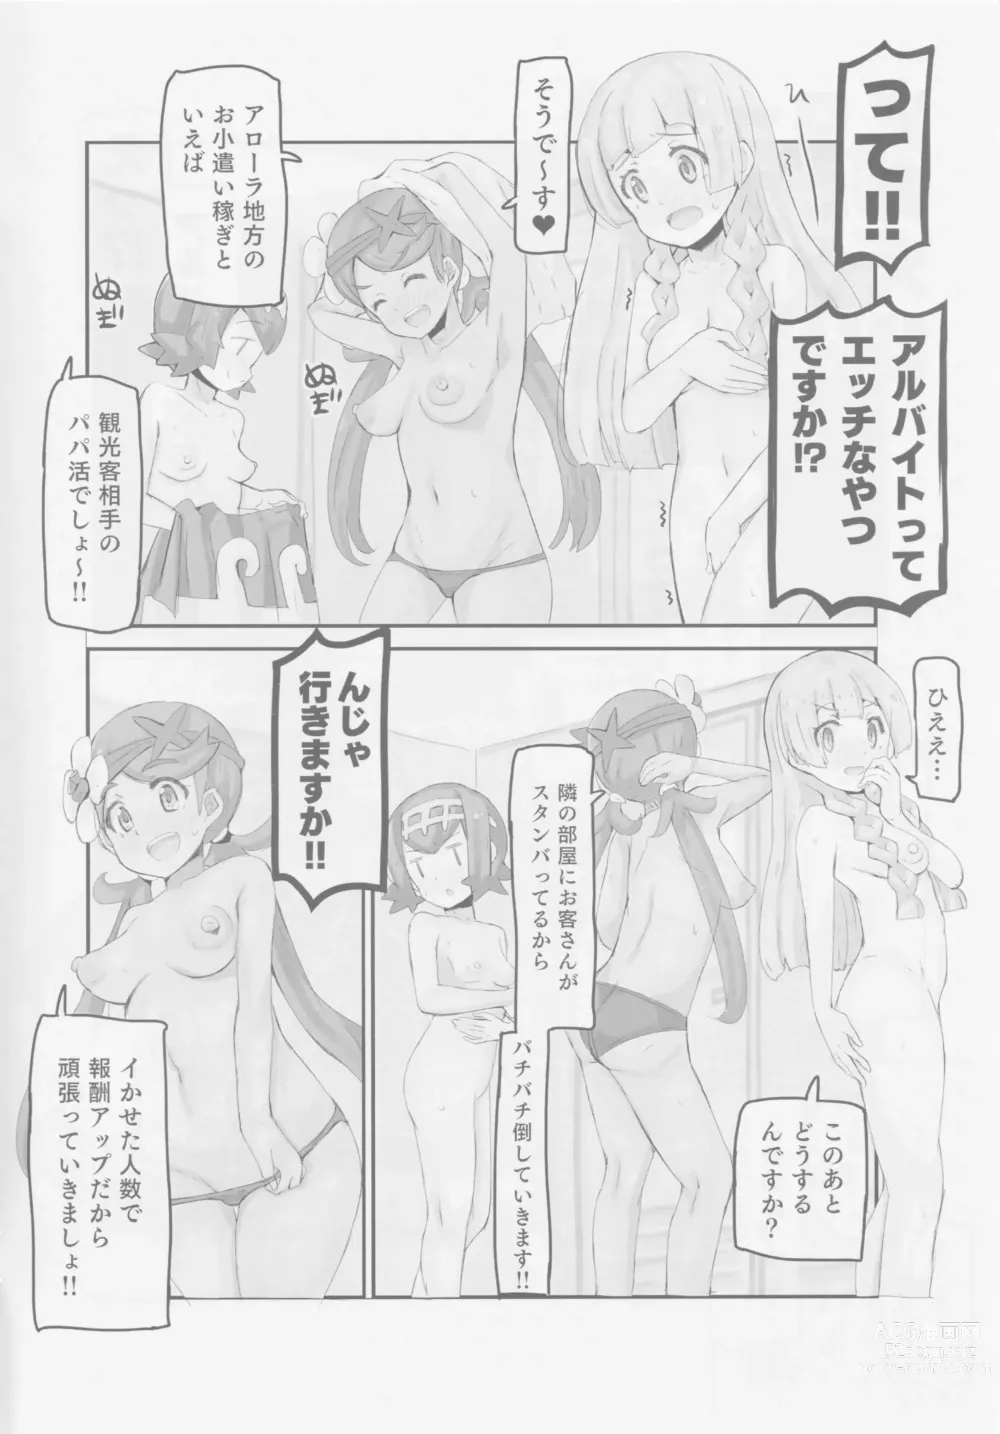 Page 6 of doujinshi Aloha Style Operation to get Pocket Money - Sugar Dating